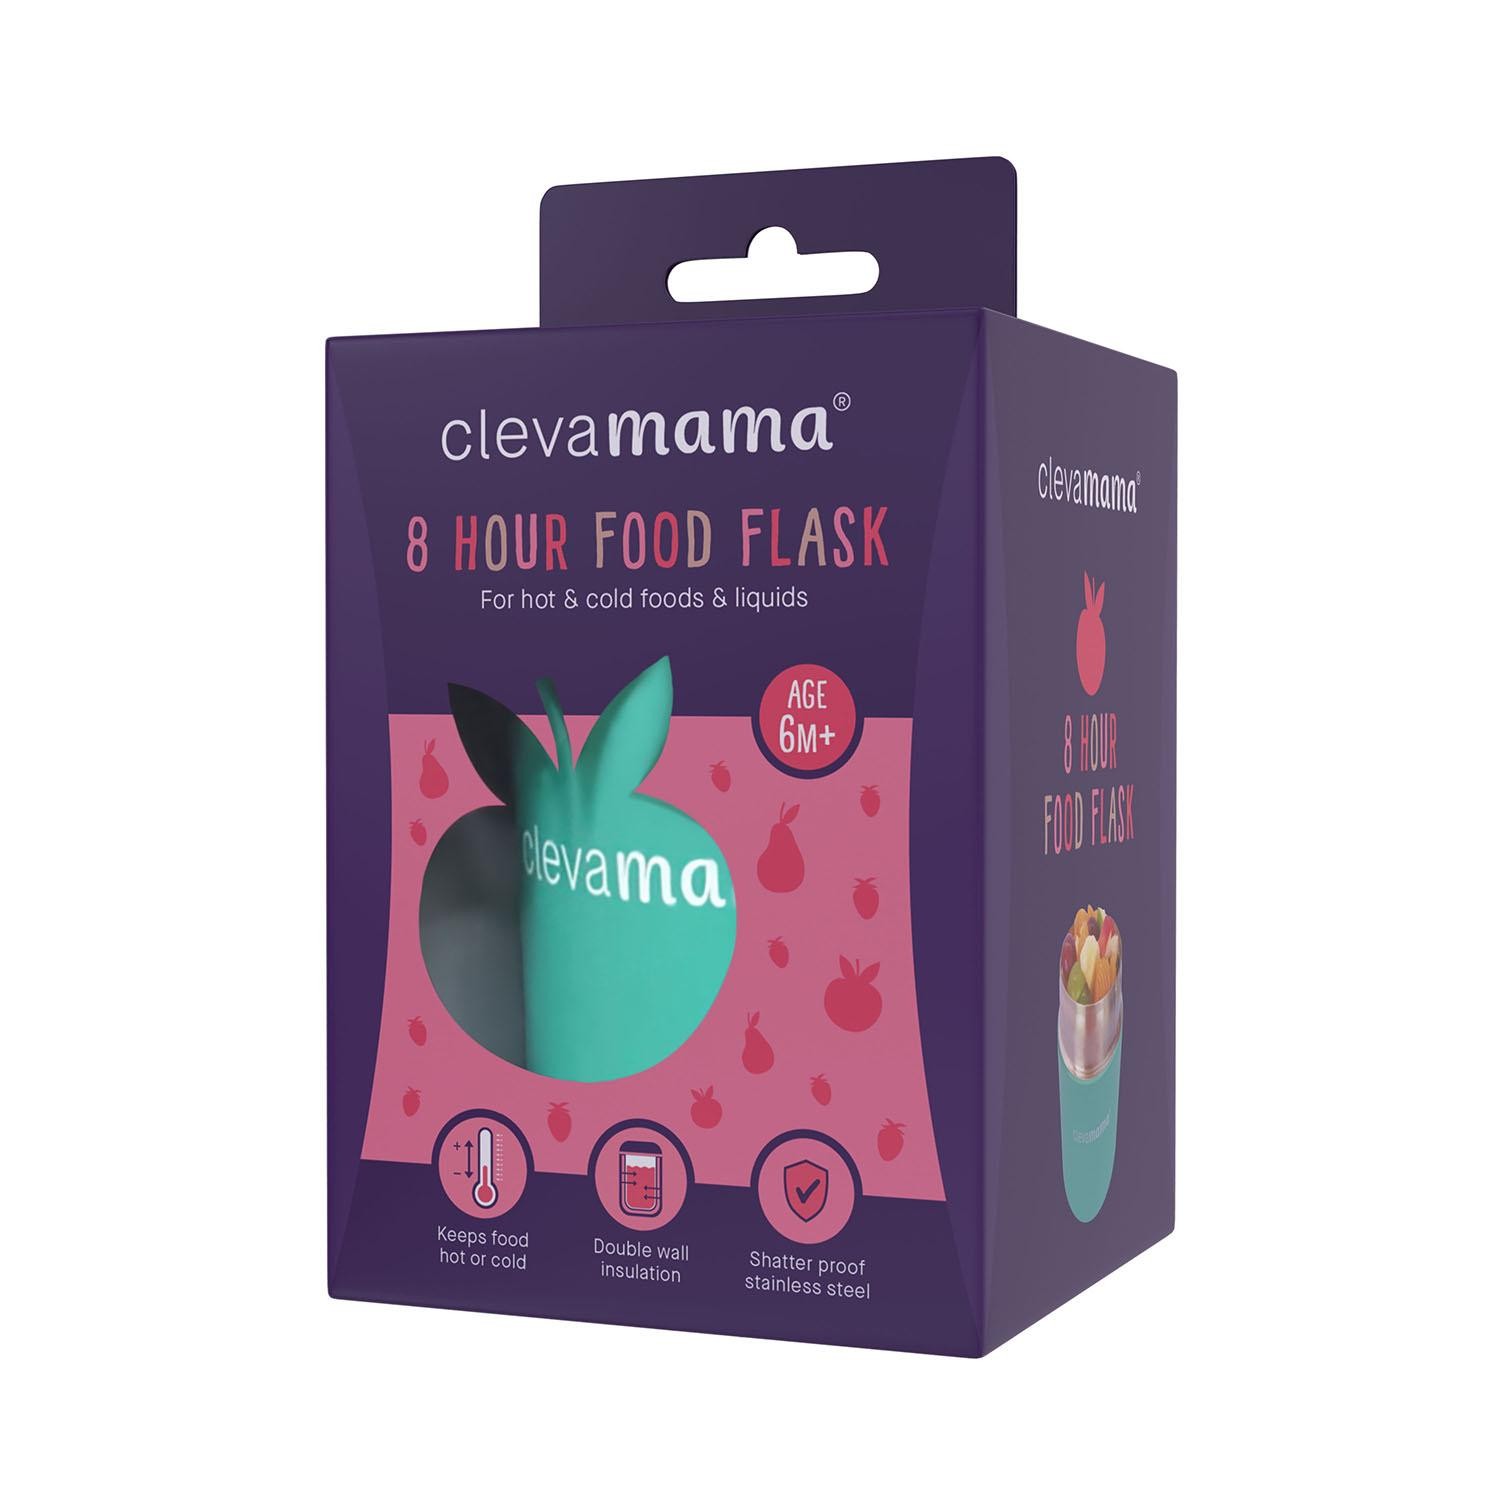 Clevamama 8 Hours Food Flask